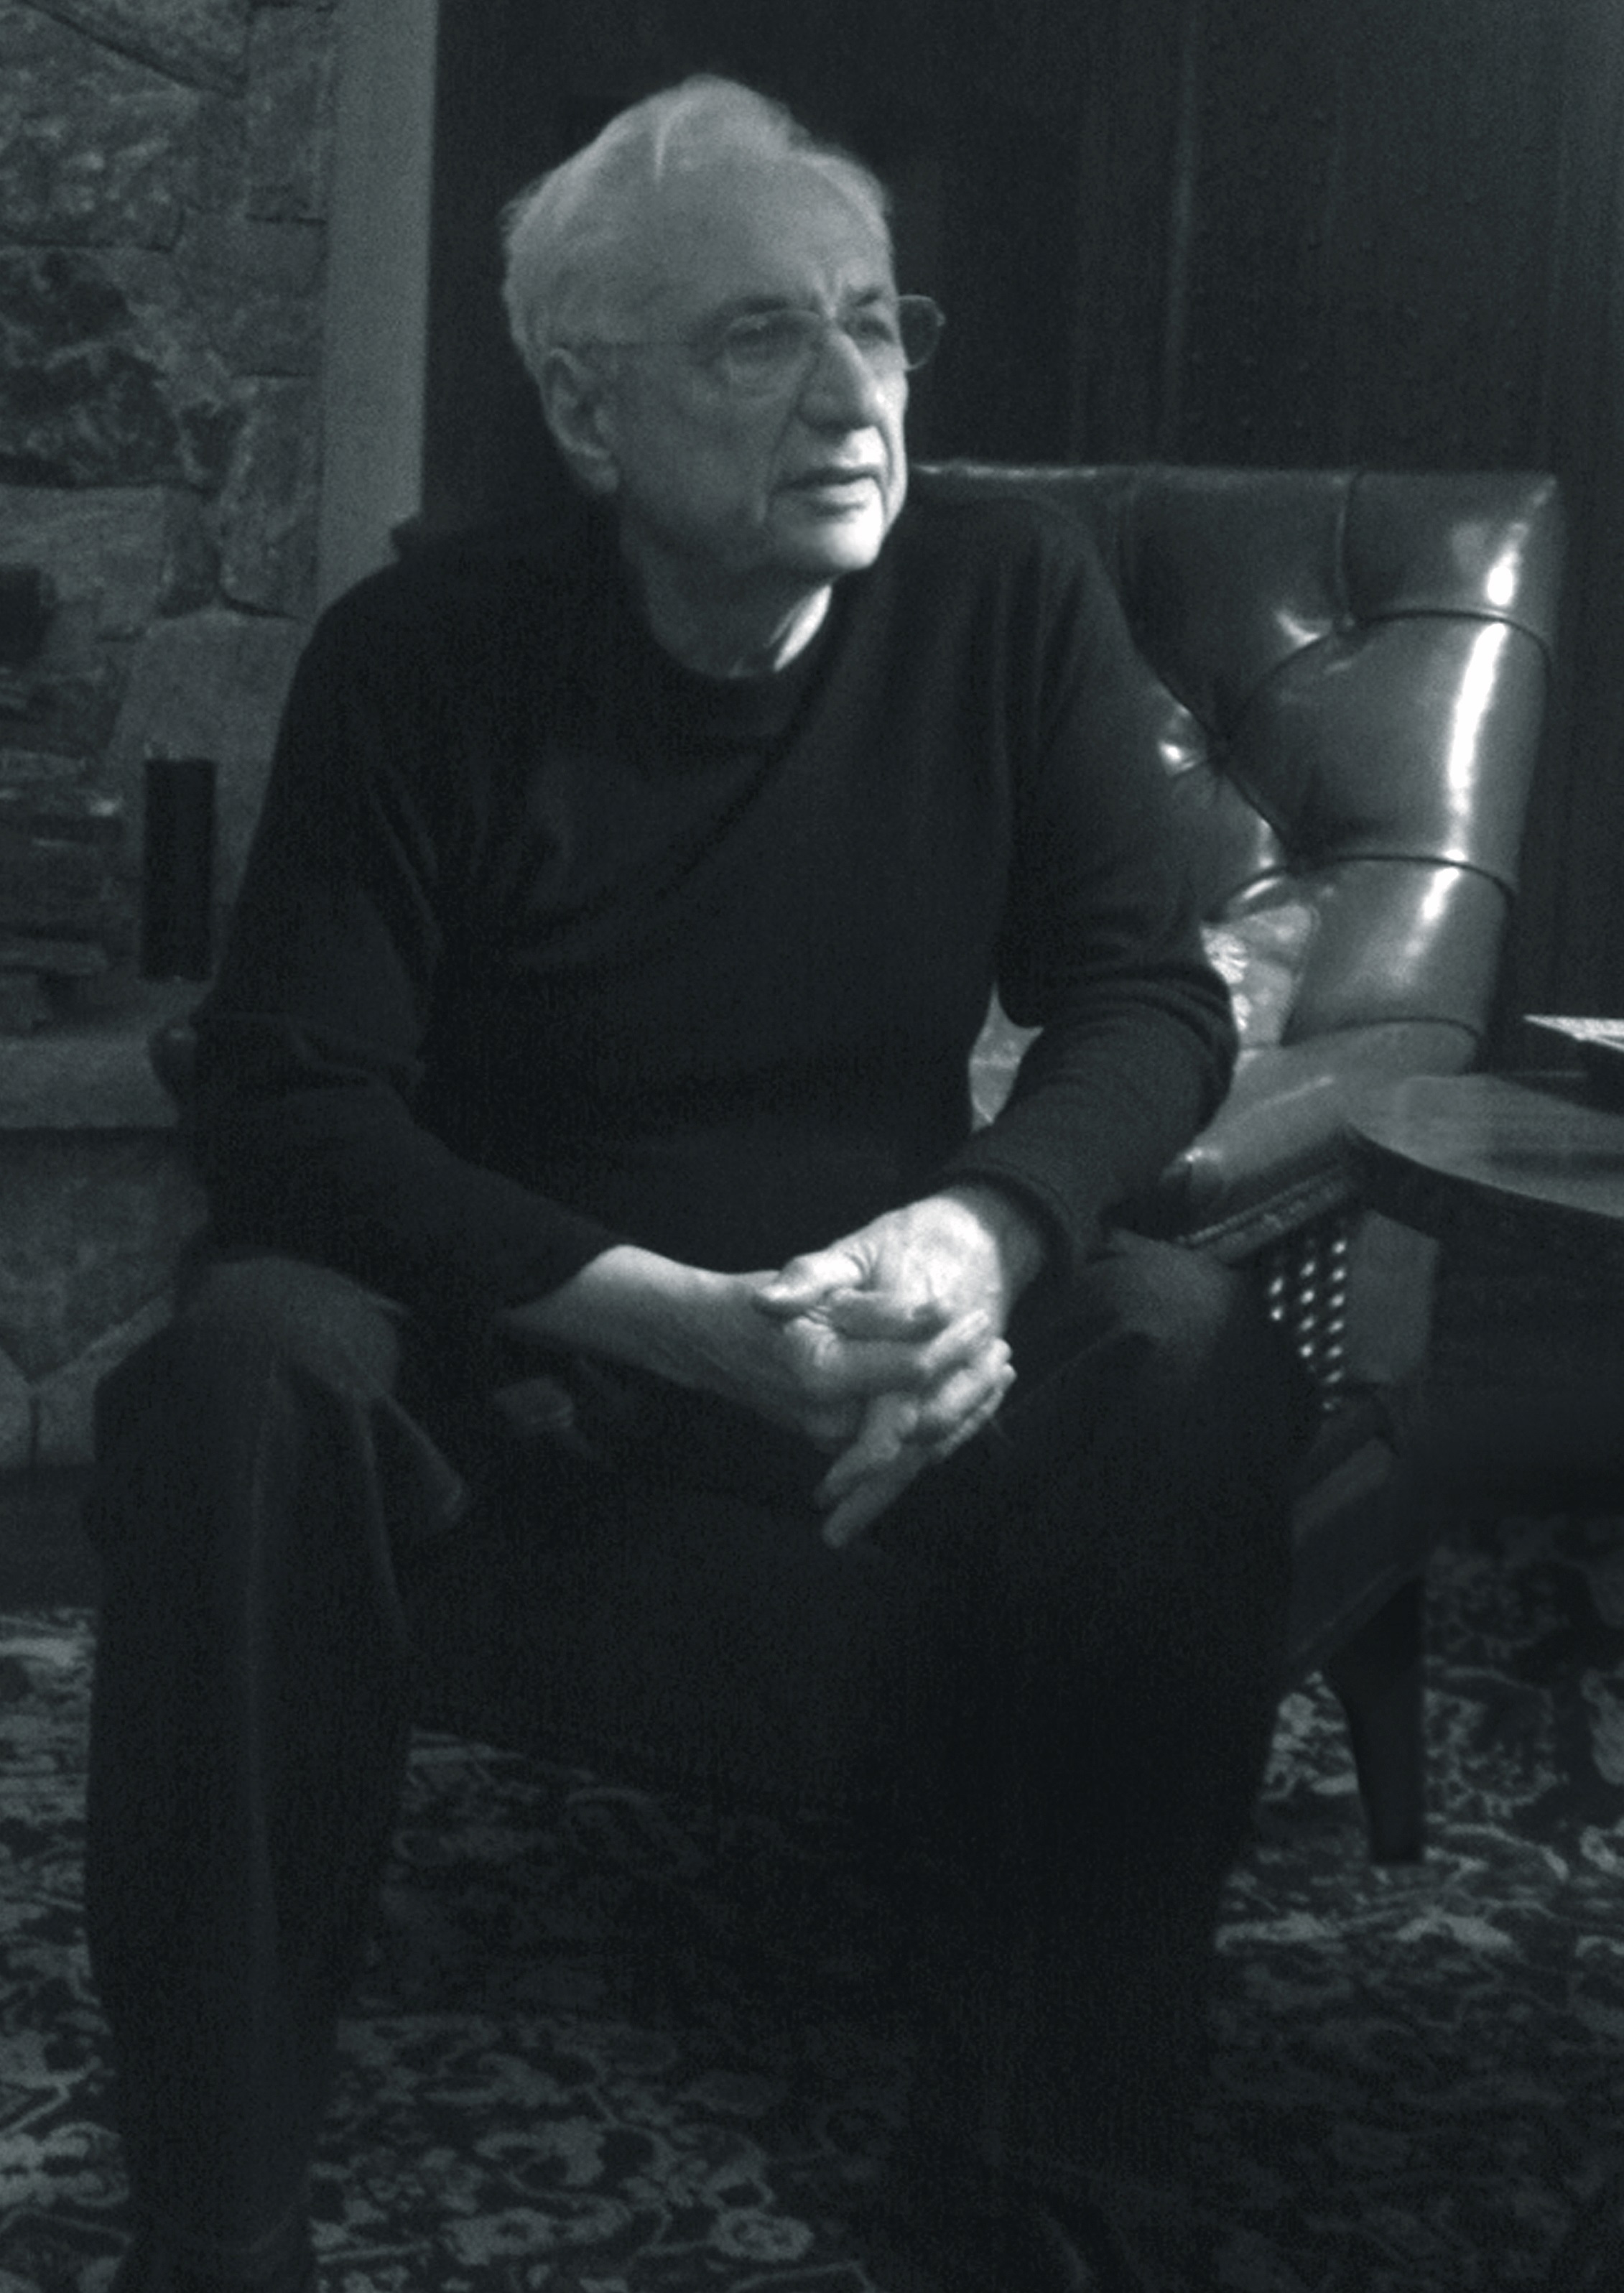 Frank Gehry sits with hands folded and a pondering gaze.